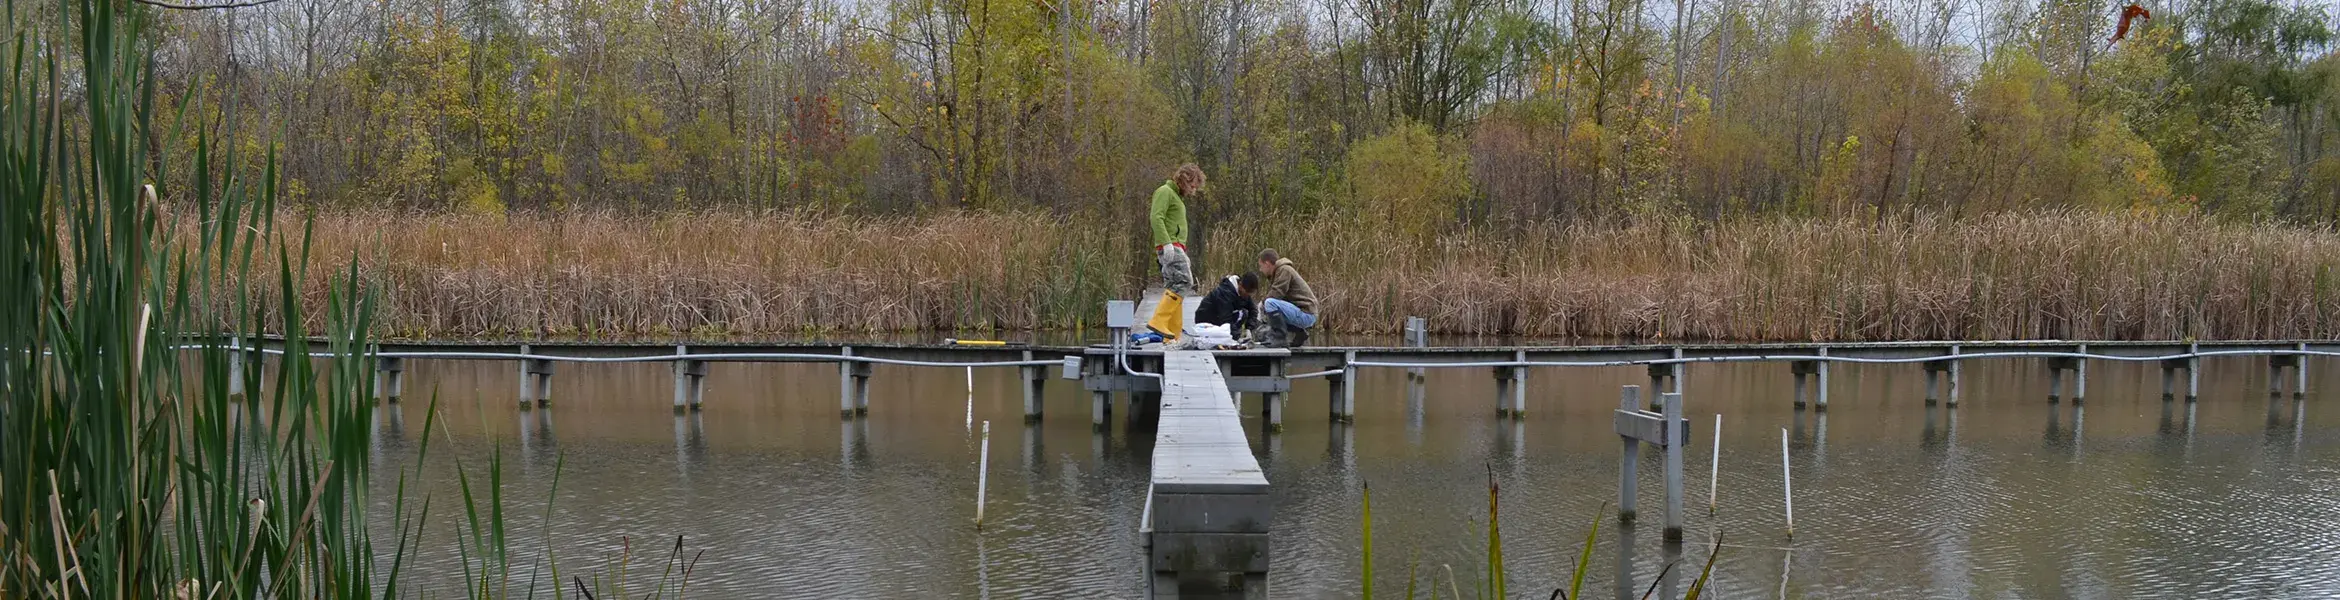 students getting ready to run tests on a small narrow dock over the water